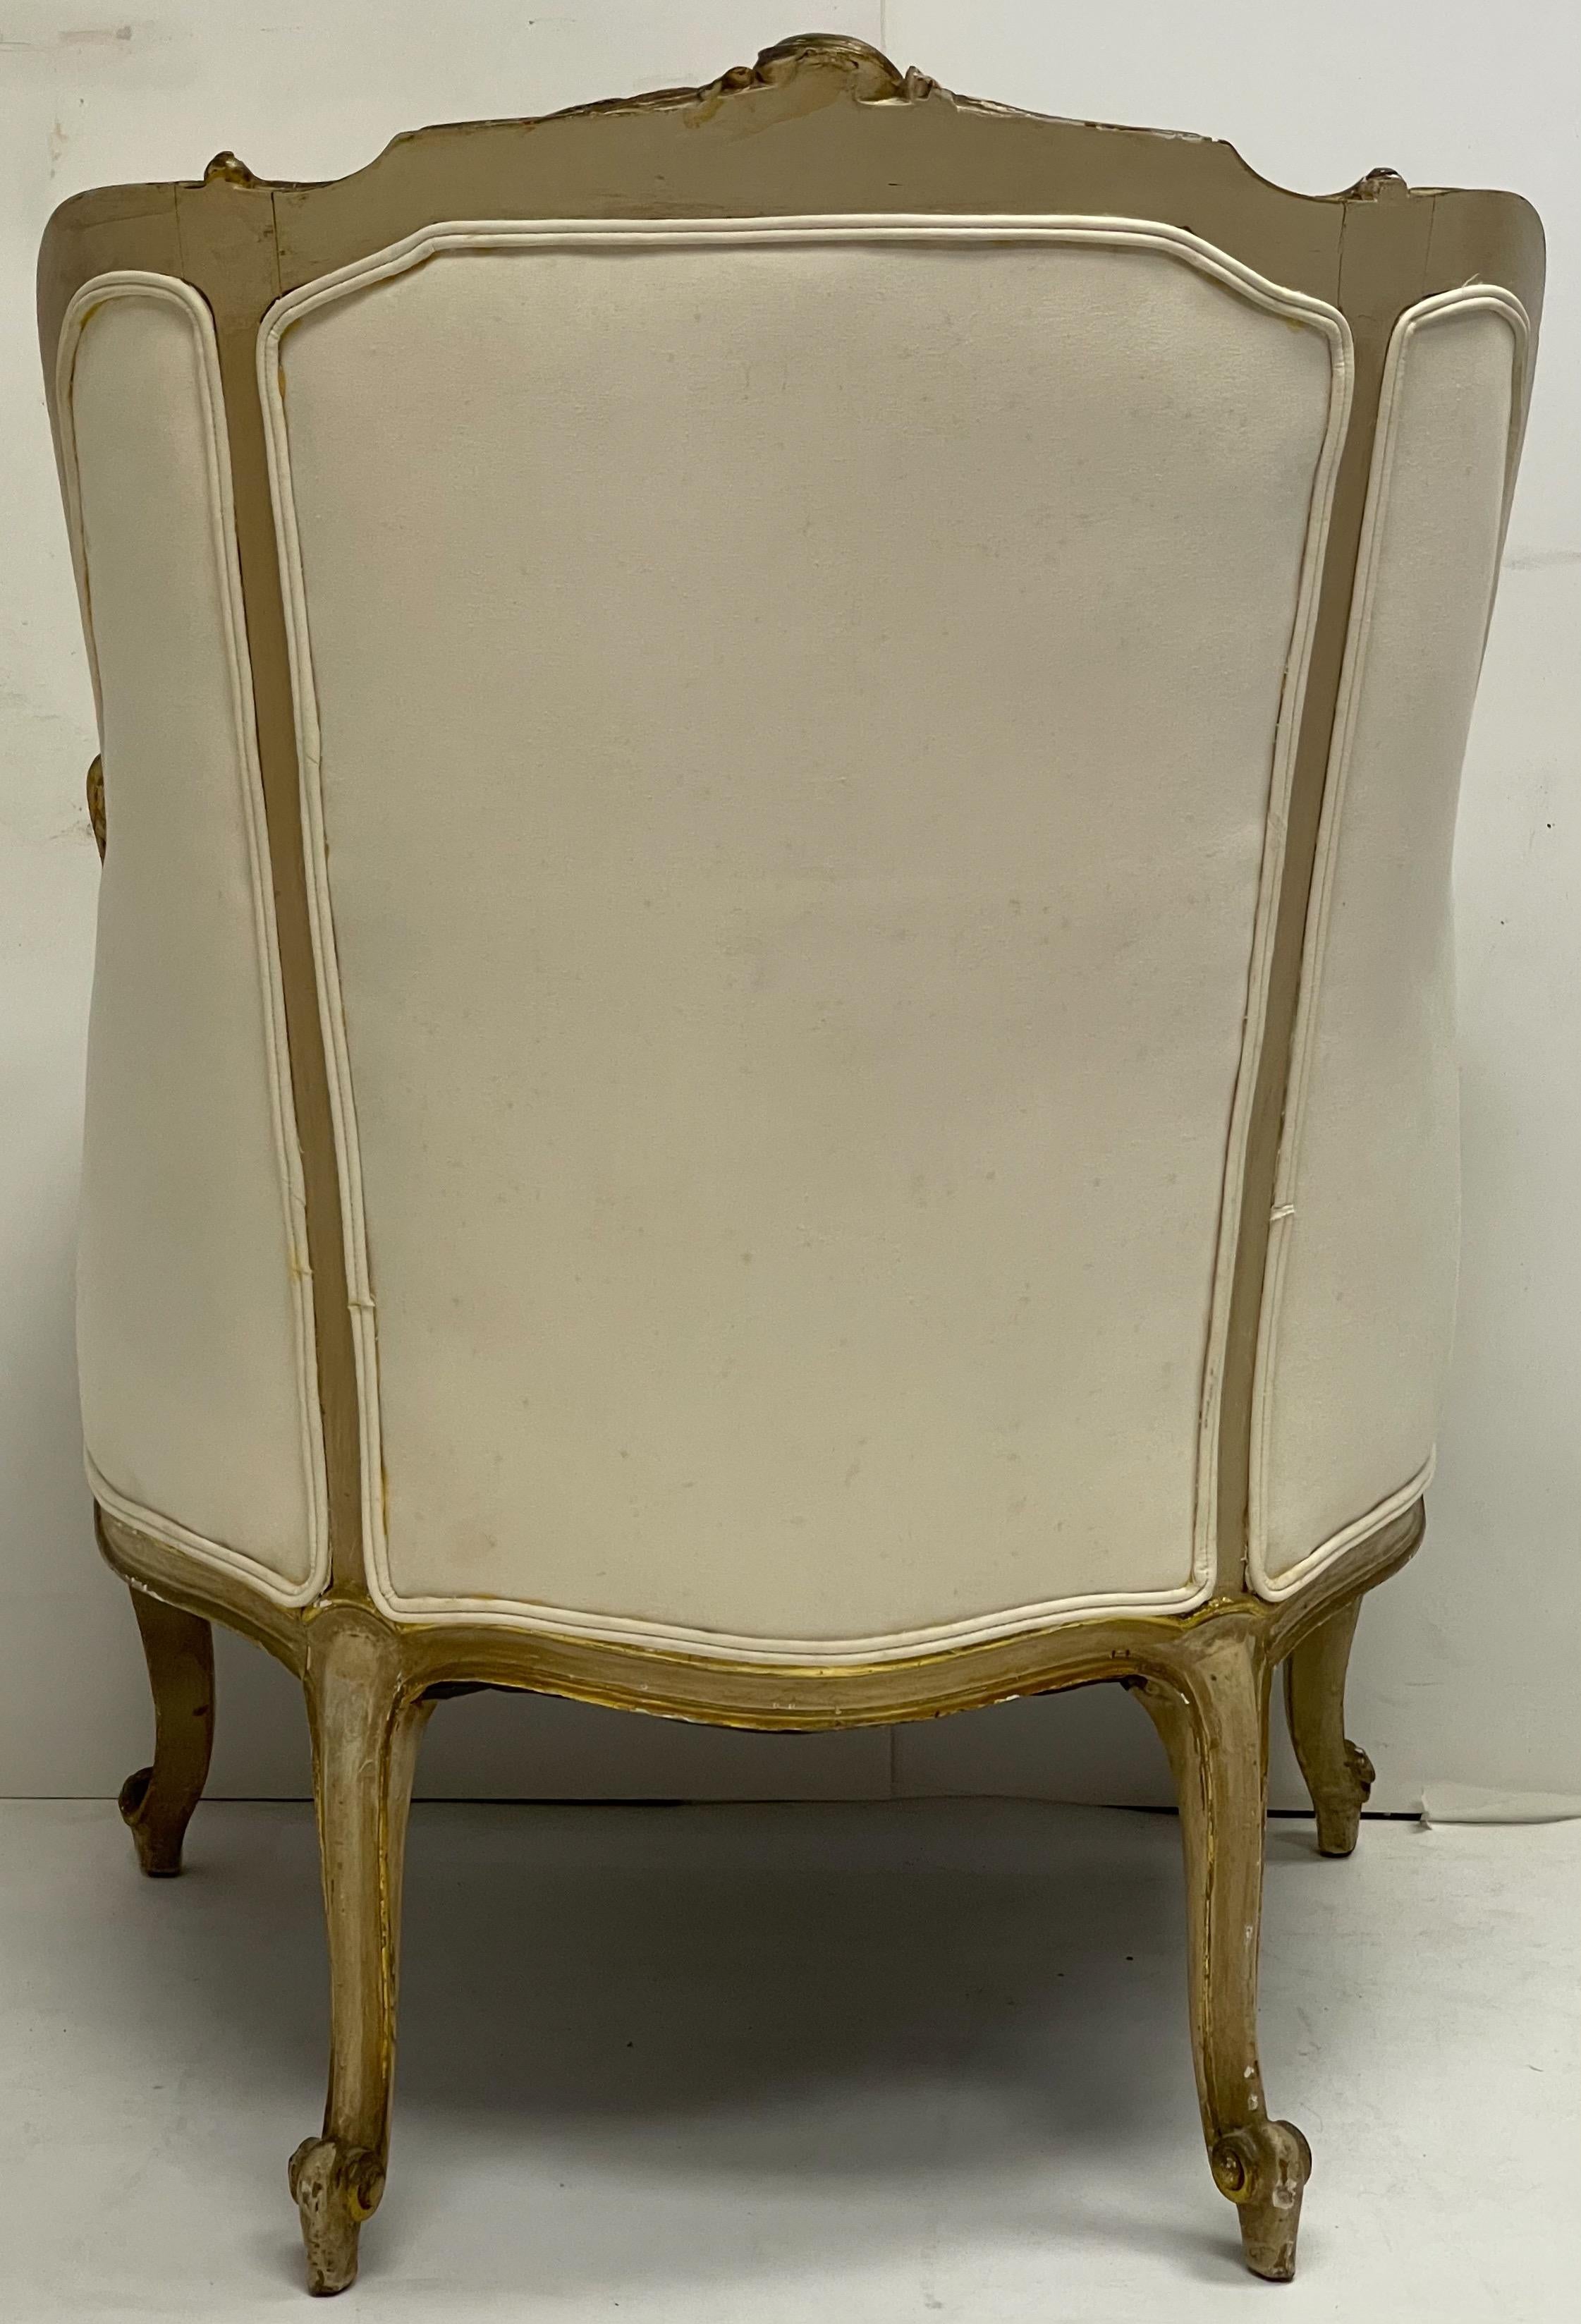 This is an antique French Louis XVI style bergere chair. The frame is both carved giltwood and paint. The upholstery is vintage and appears to be a cotton canvas type of fabric. The condition overall is strong. Arm;21”.